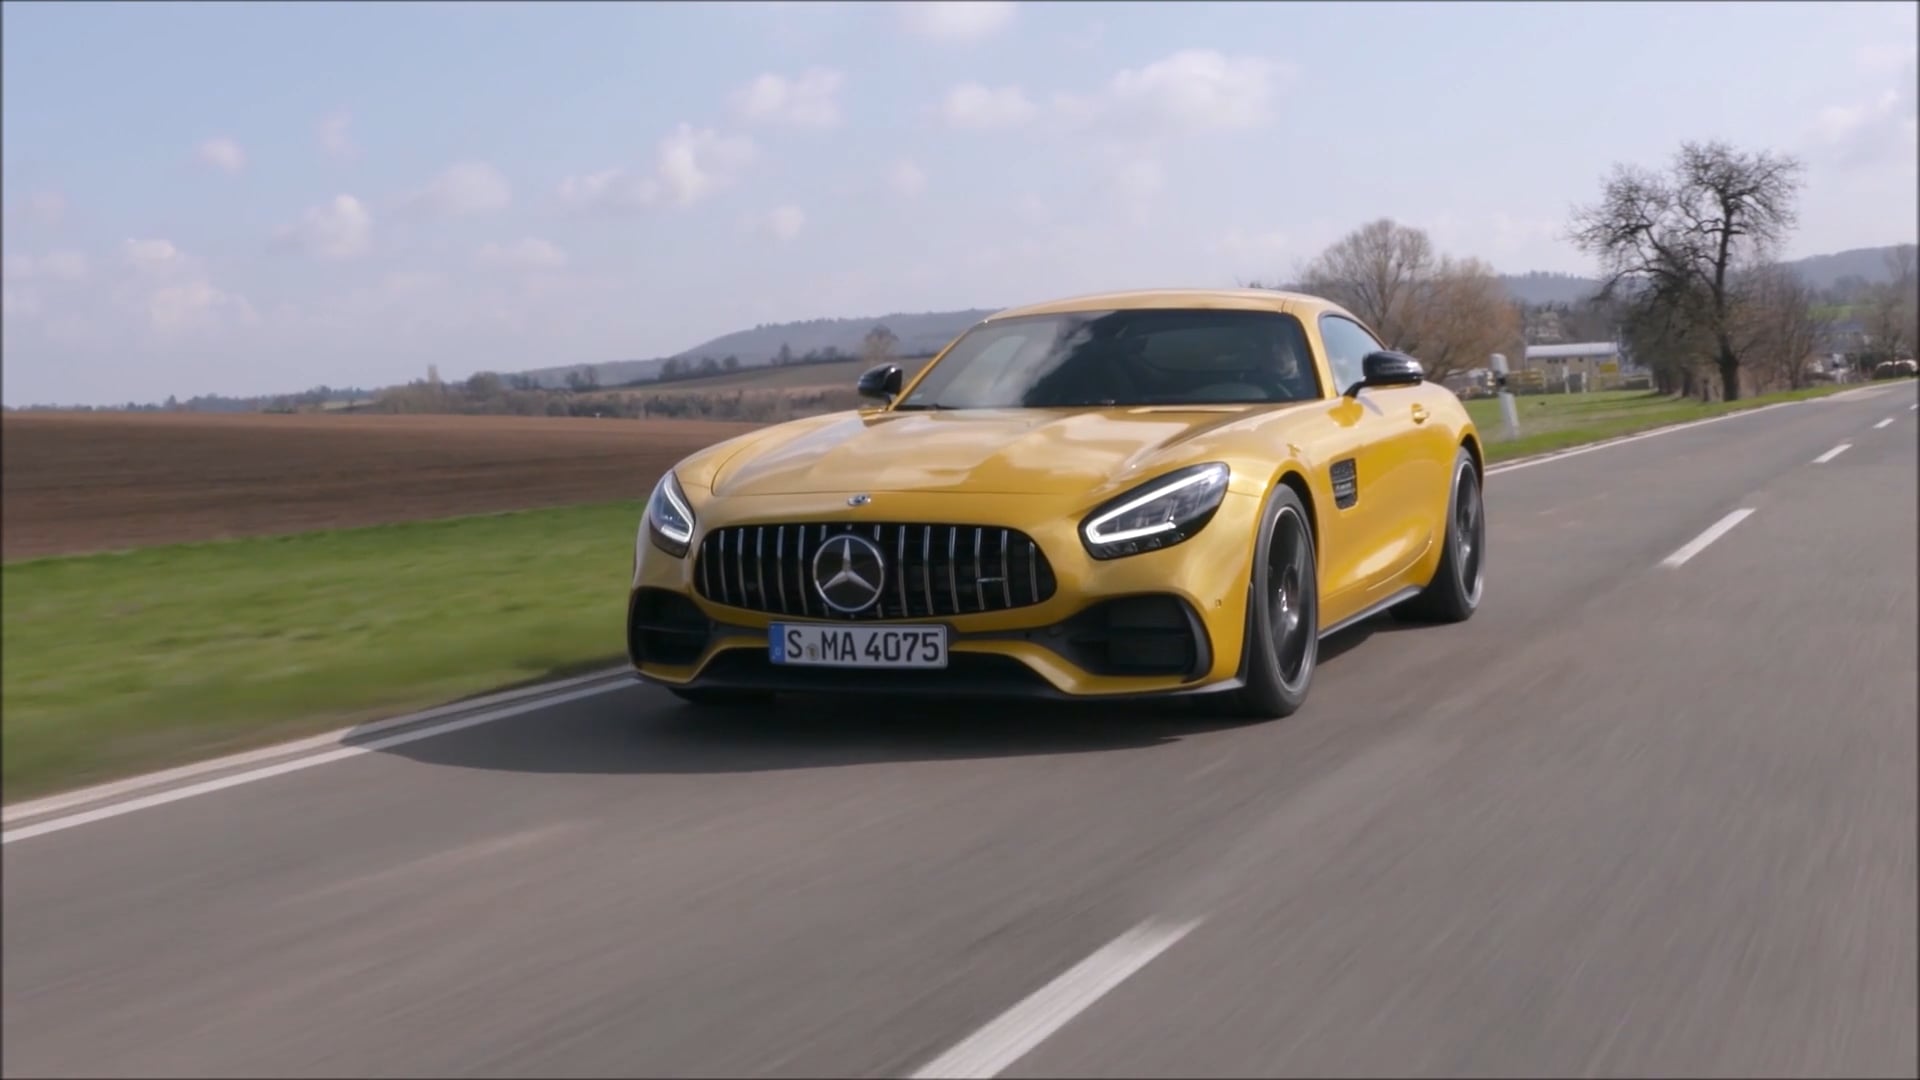 Overview: 2020 Mercedes-AMG GT S Coupe